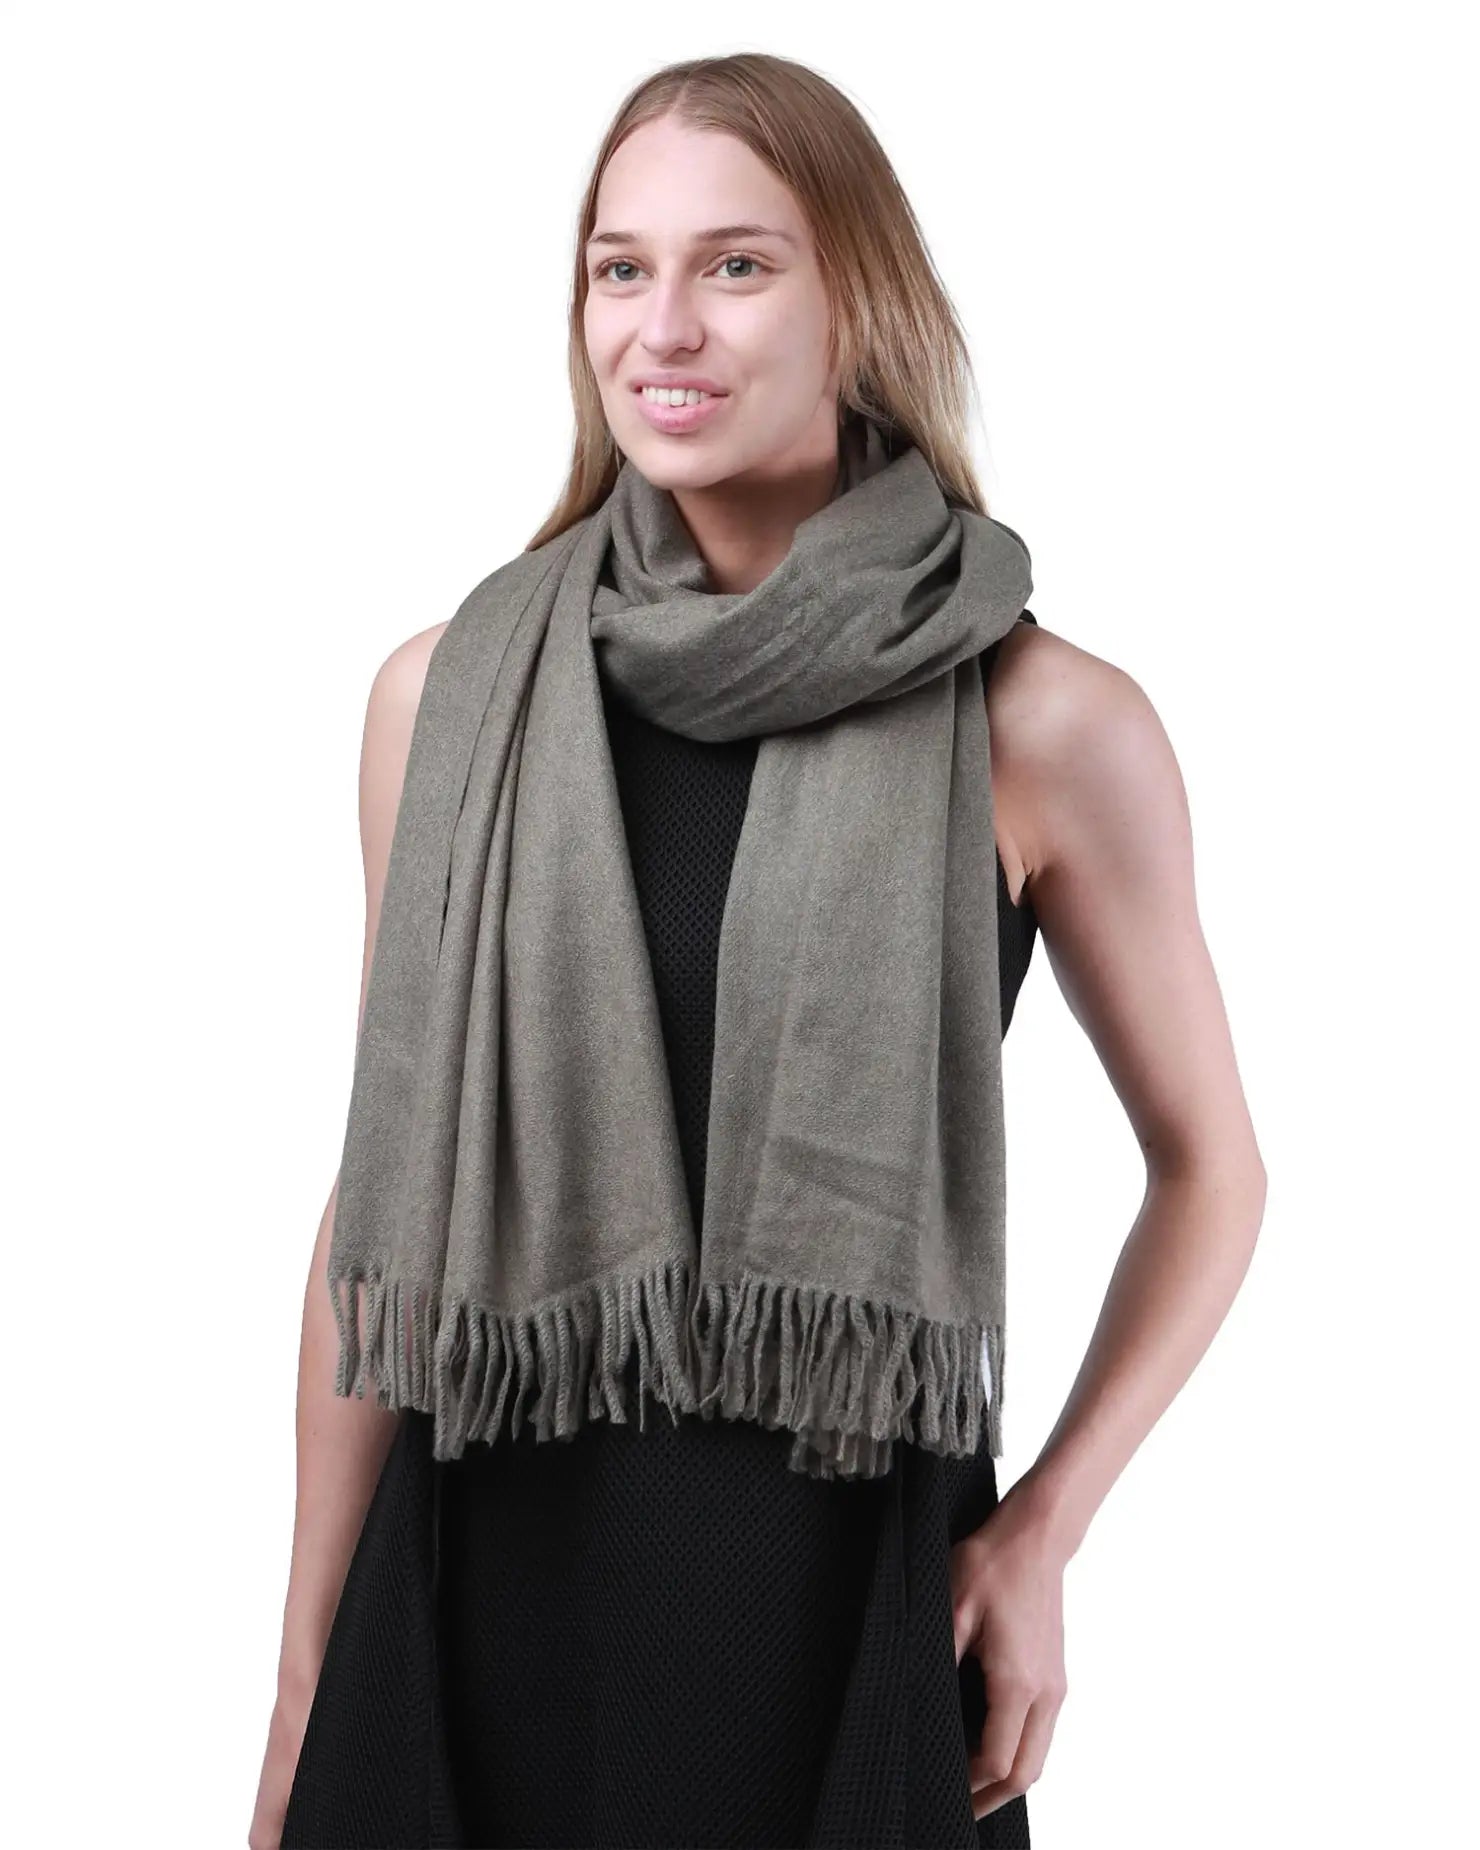 Luxurious cashmere feel oversized scarf worn by a woman